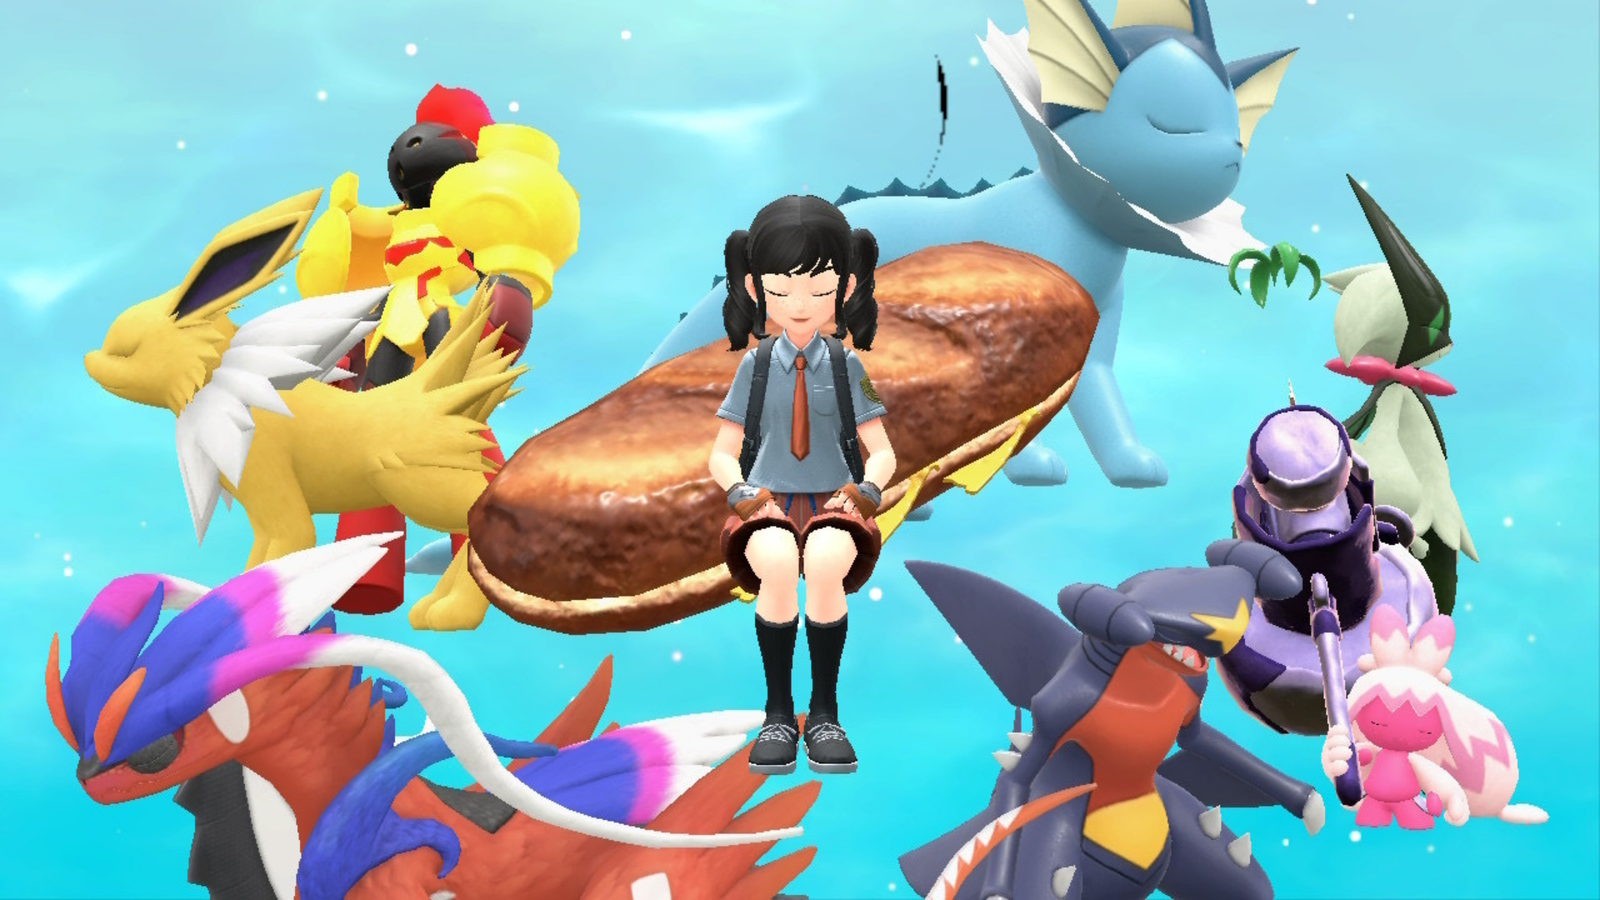 Pokémon Scarlet and Violet Sandwich making guide and best sandwich recipes